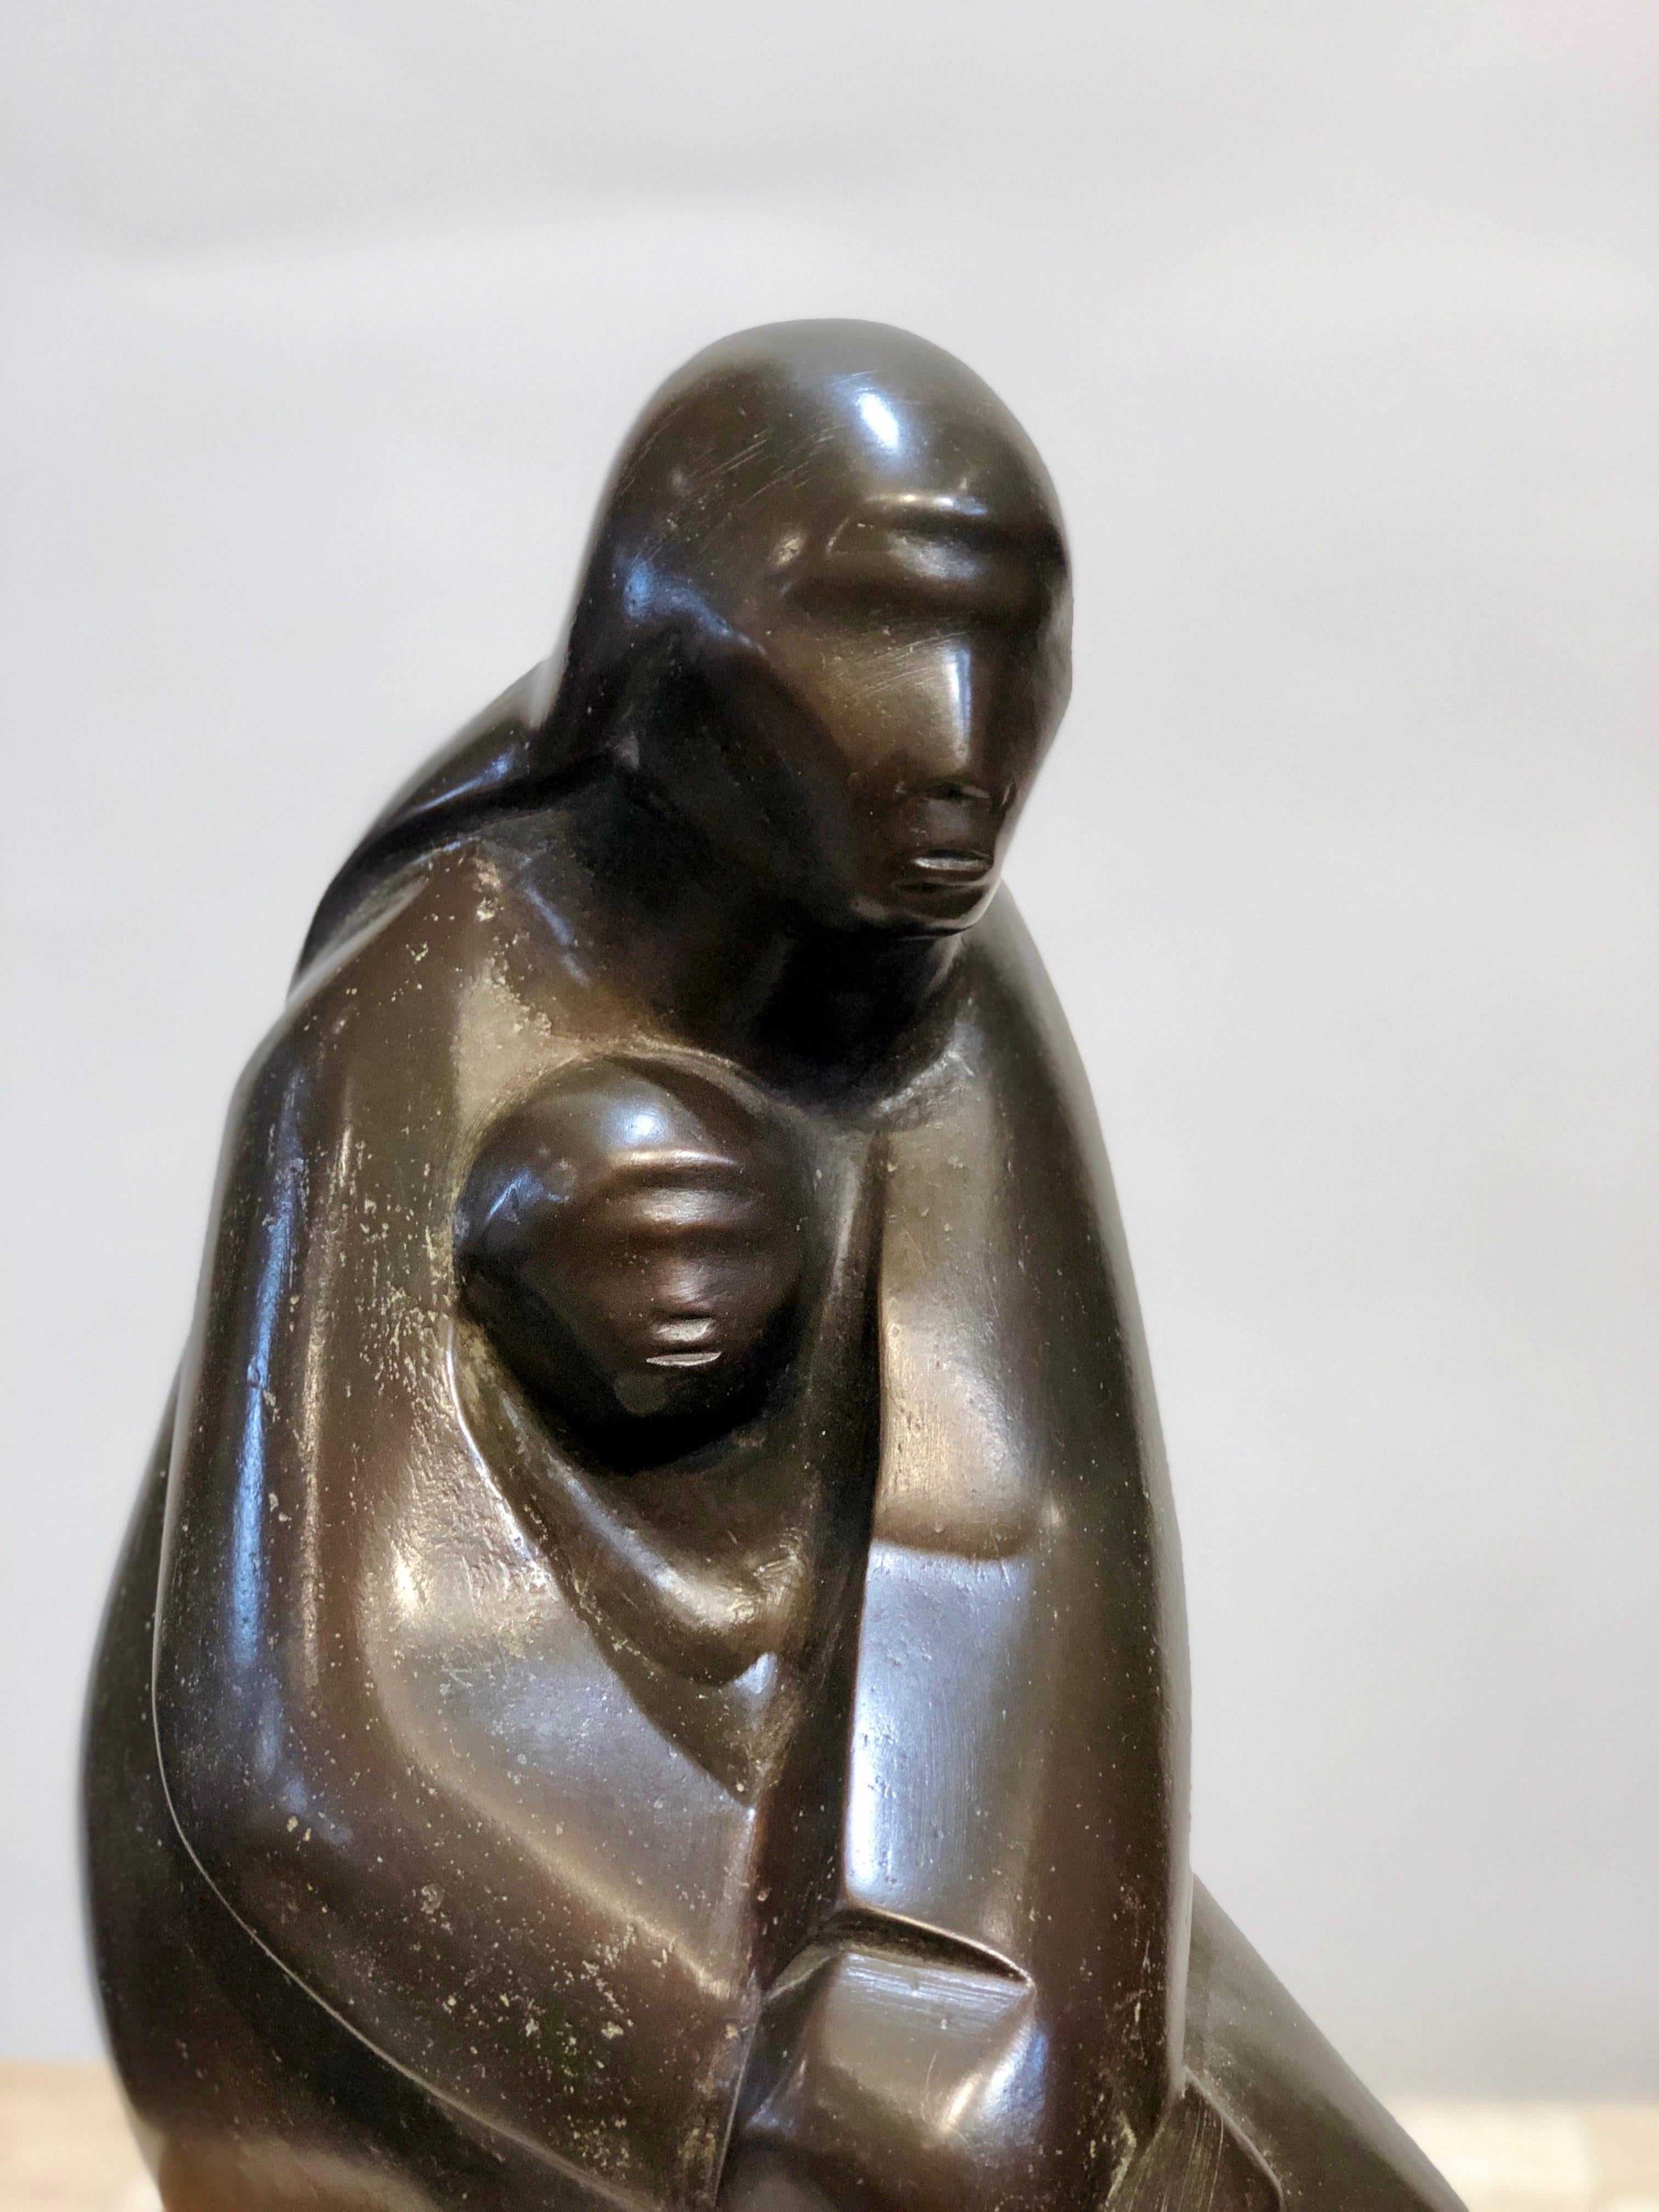 Almost Asleep by Allan Houser, mother and child bronze sculpture, limited edition, brown patina, walnut base, lifetime casting

Allan Houser (Haozous), Chiricahua Apache (1914-1994)

Selected Collections
Centre Georges Pompidou, Paris, France *